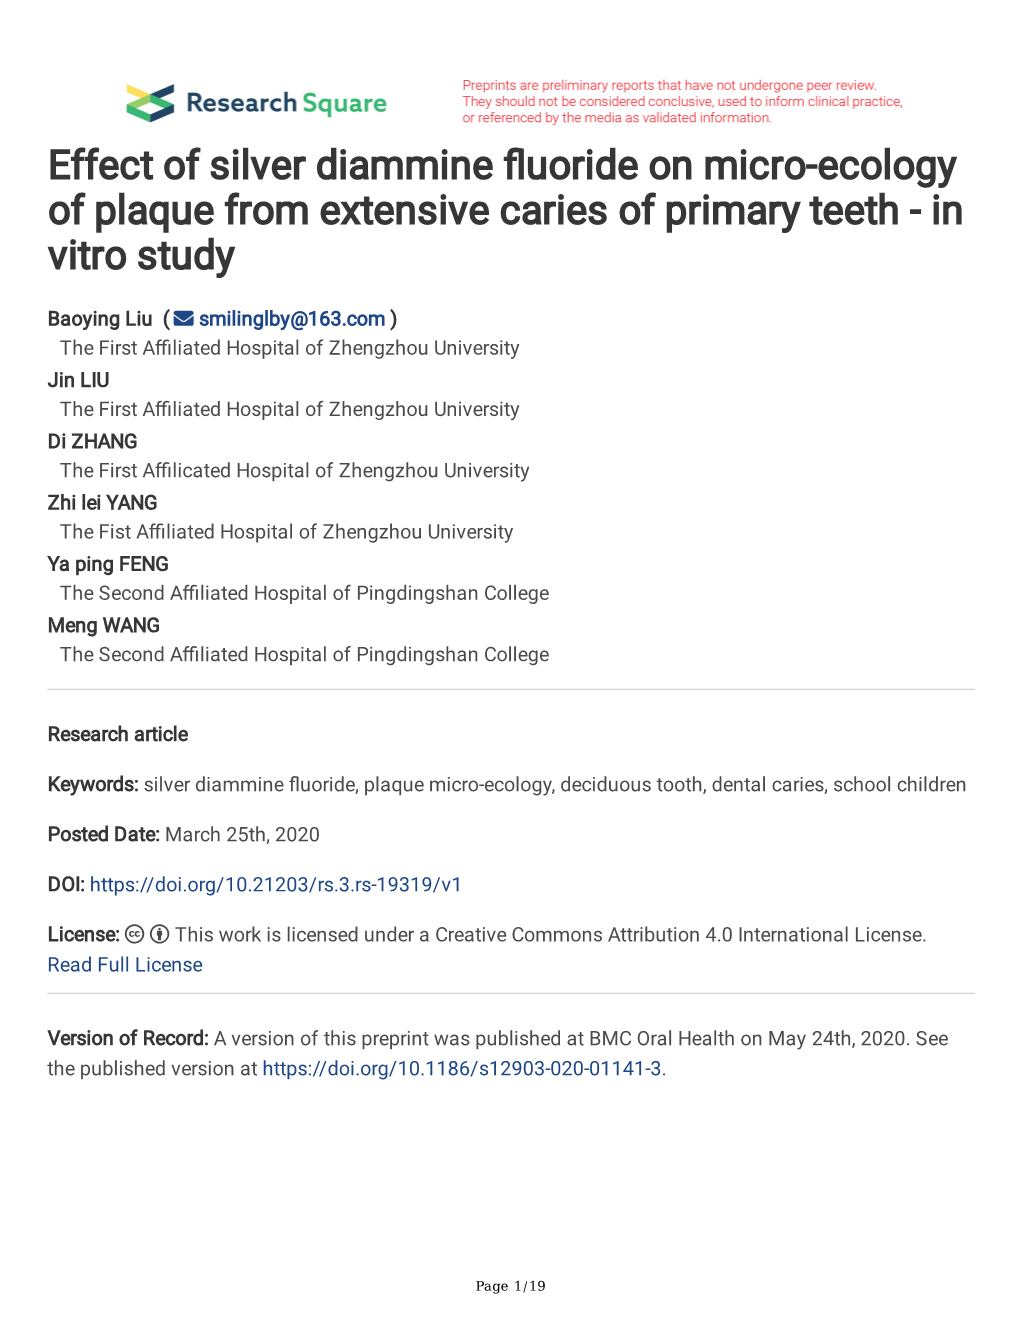 Effect of Silver Diammine Fluoride on Micro-Ecology of Plaque from Extensive Caries of Primary Teeth